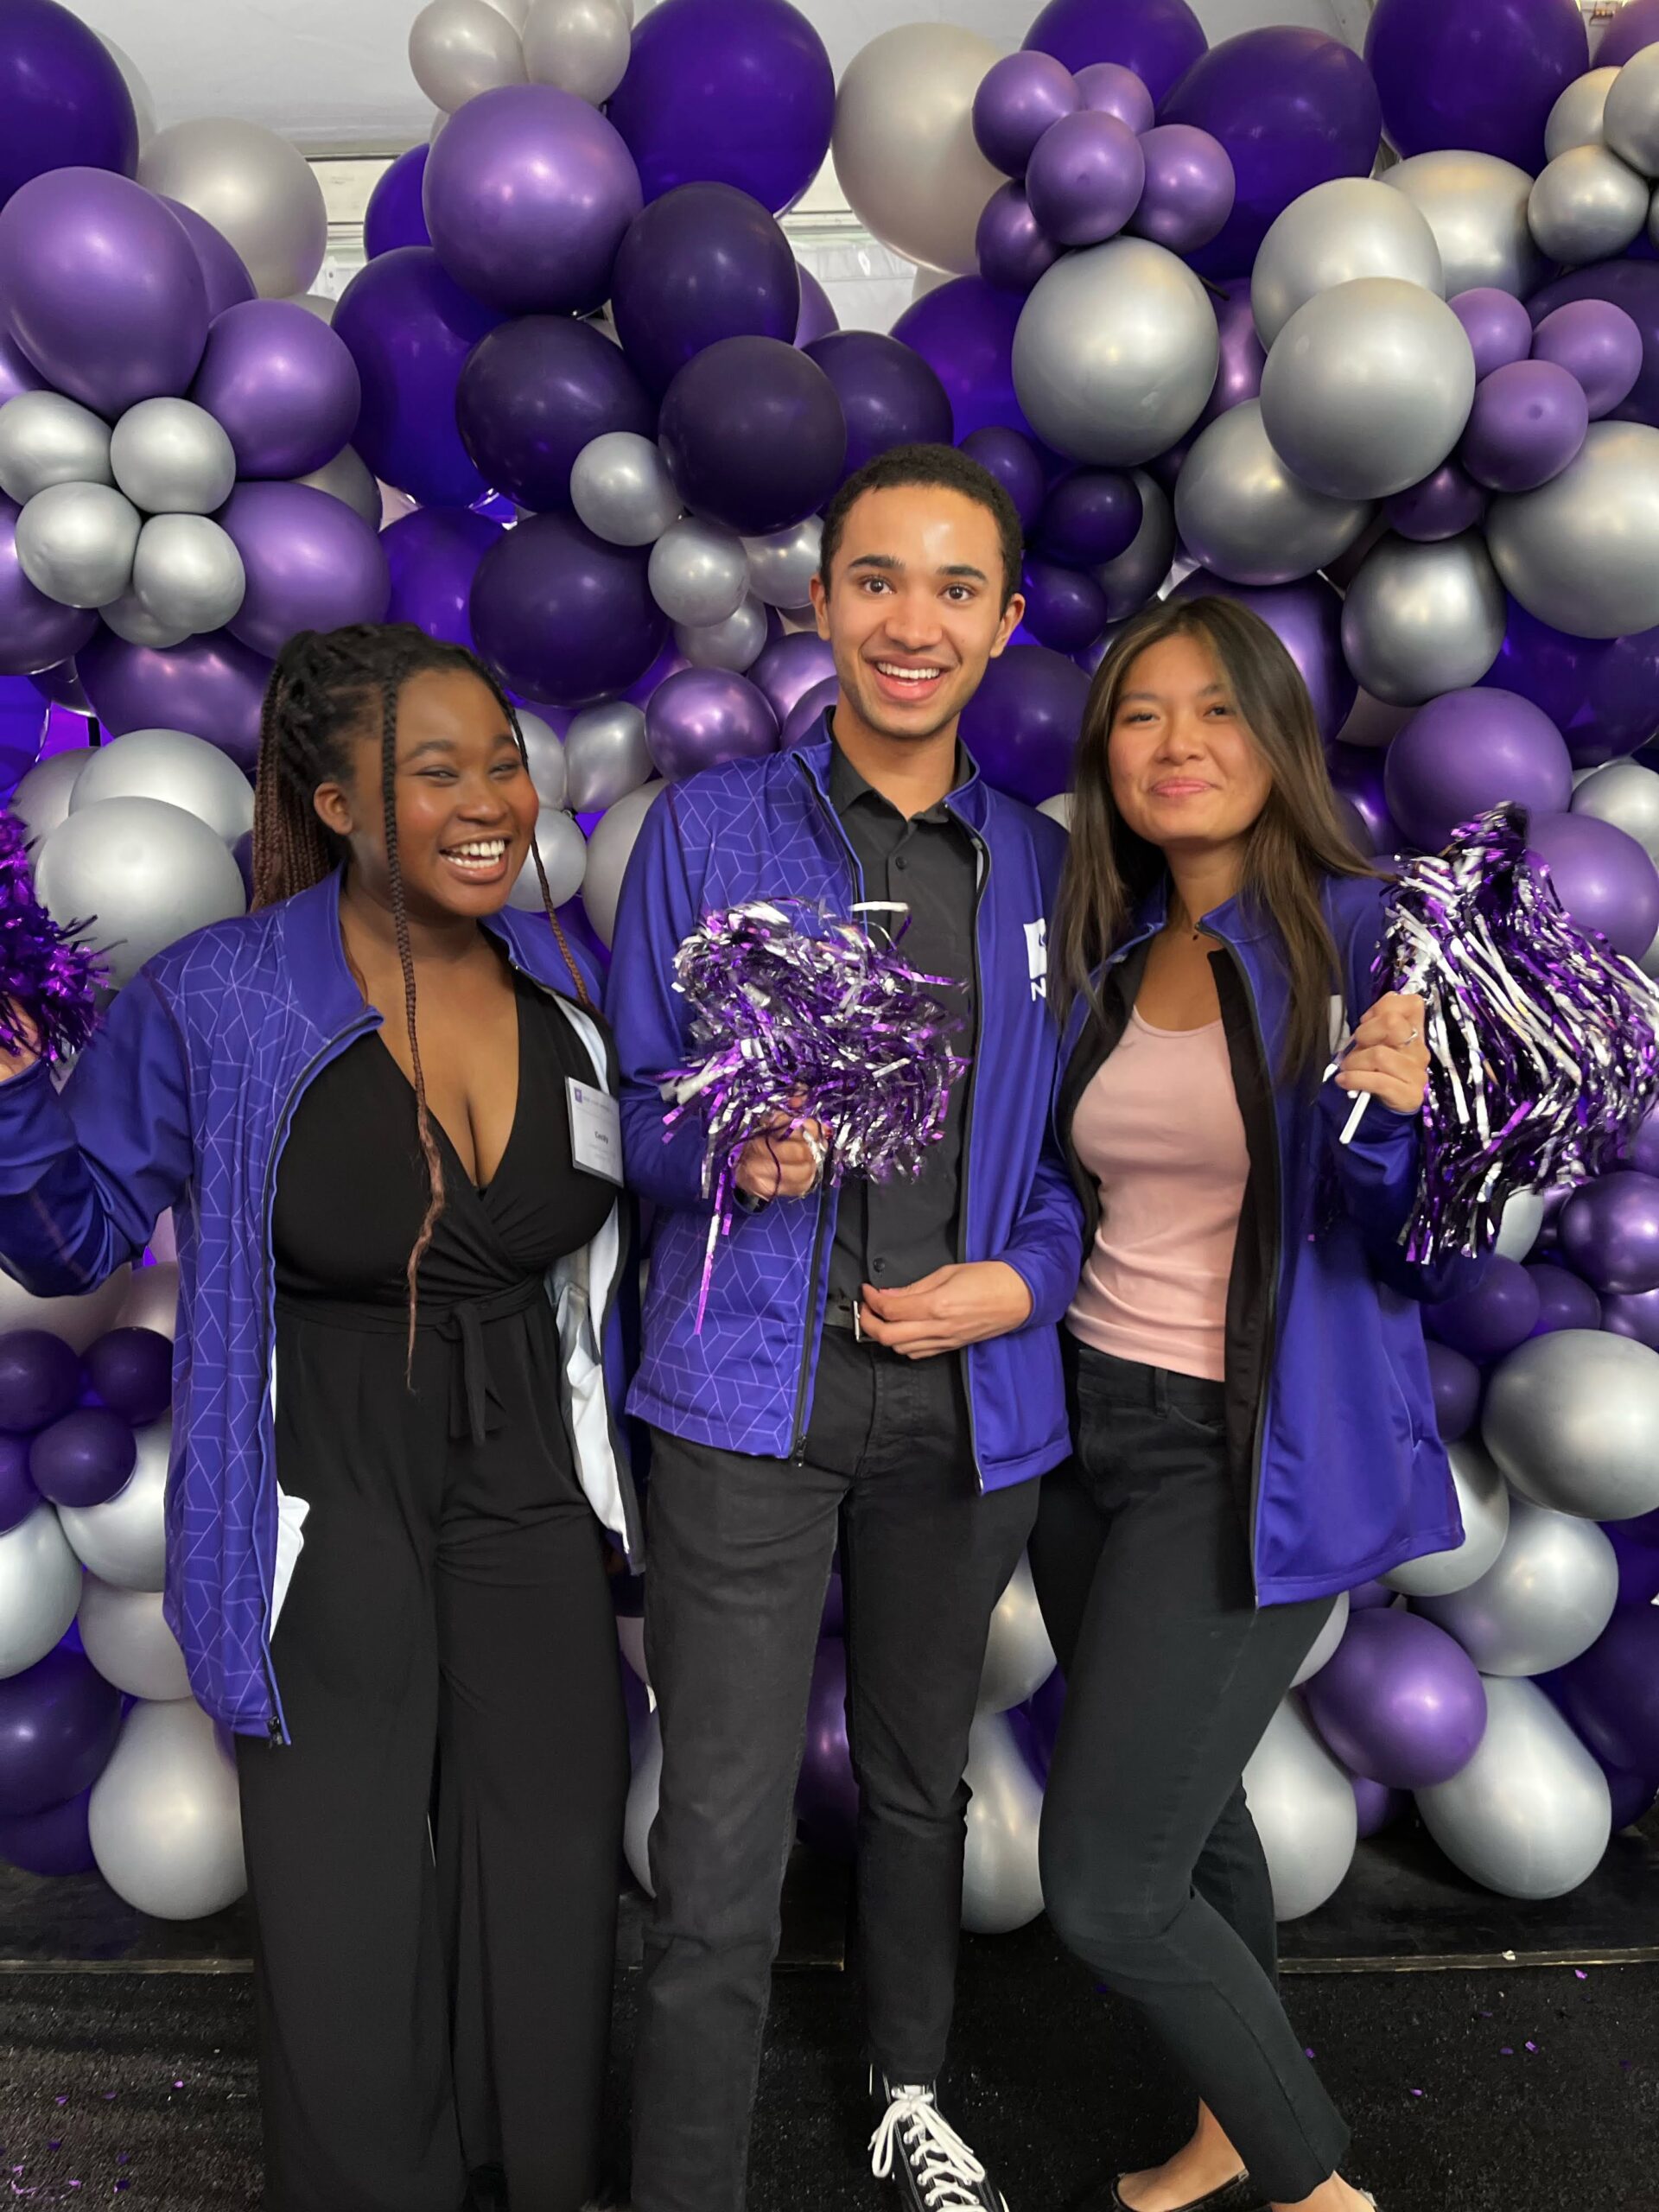 Three friends wearing purple jackets and surrounded by purple and silver balloons smile at a work event.